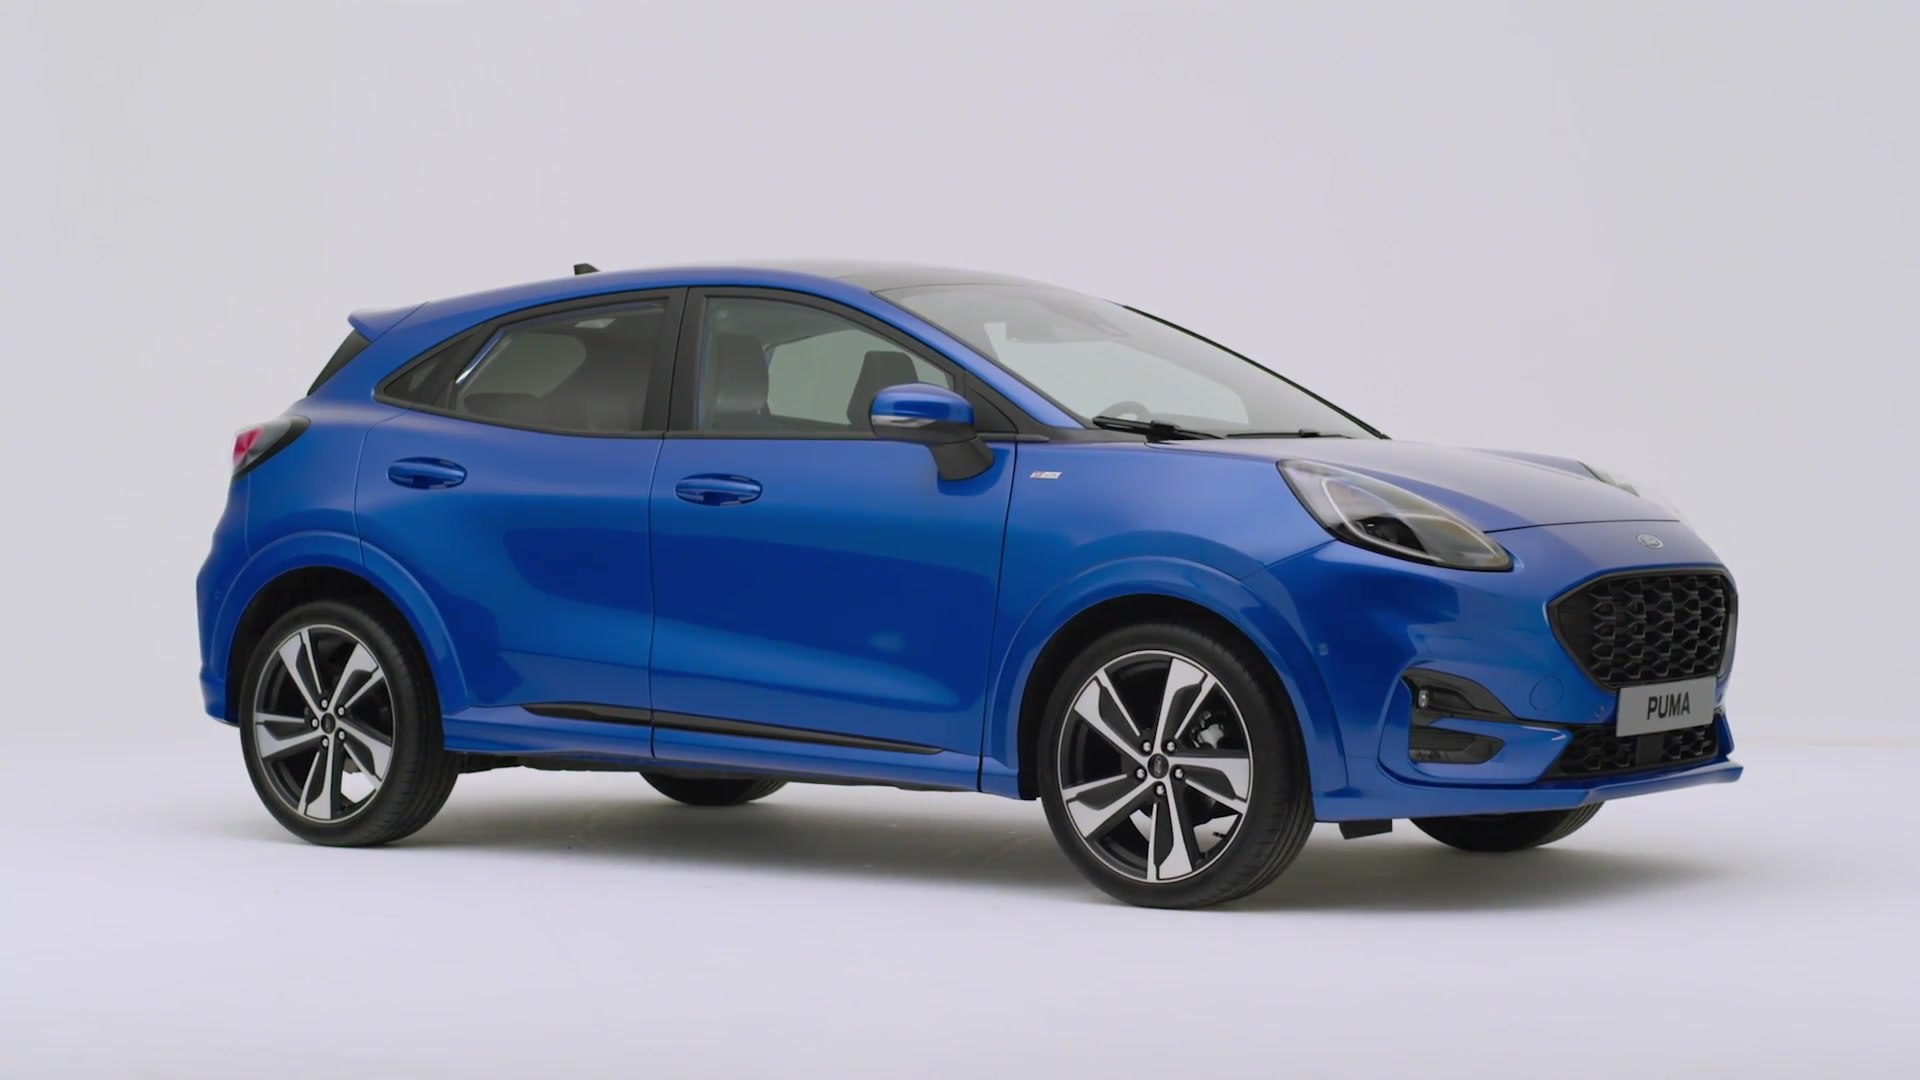 The new Ford Puma crossover - video Dailymotion